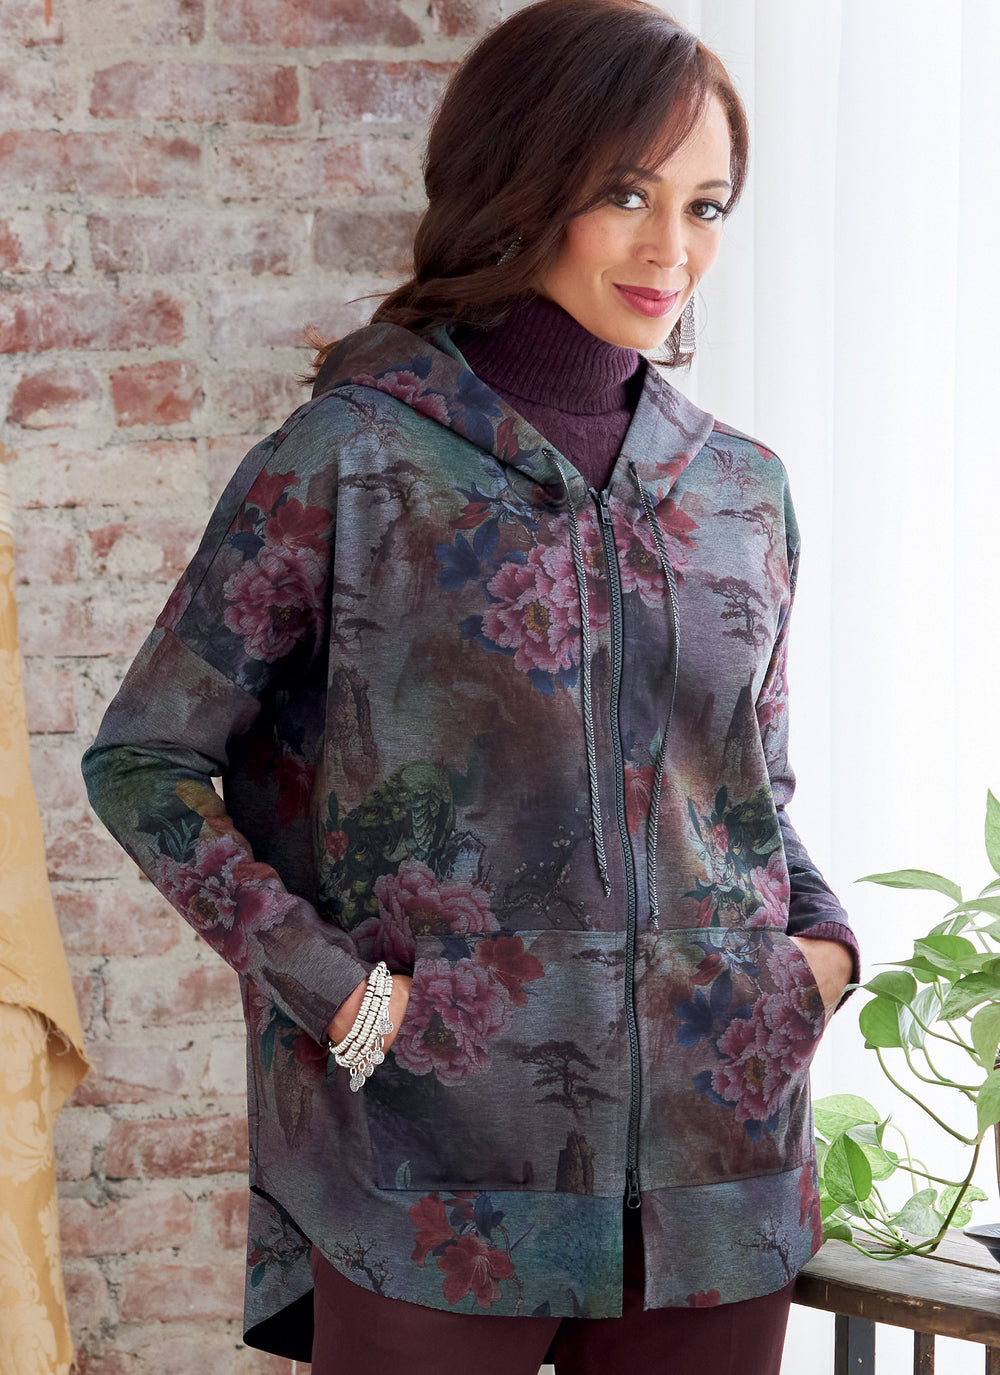 Butterick sewing pattern 6863 Misses' Jacket from Jaycotts Sewing Supplies